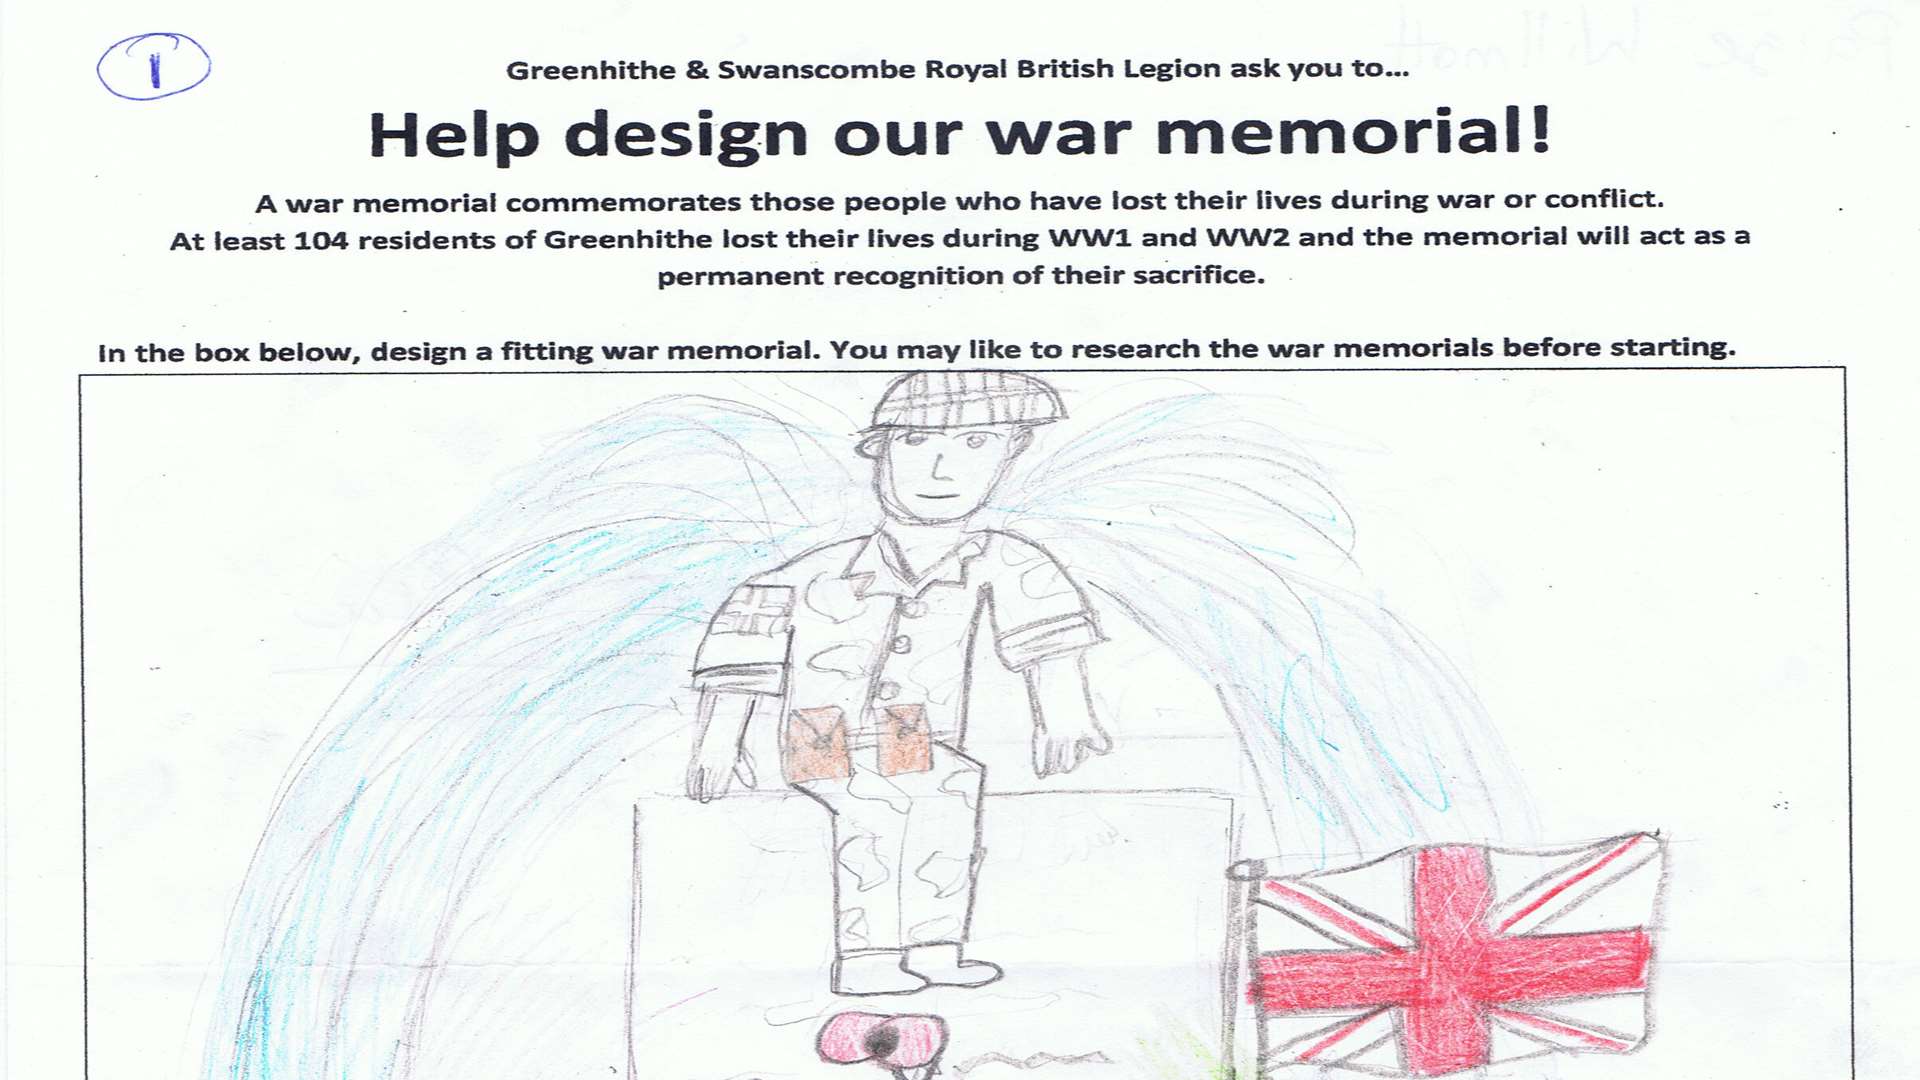 Pupils from the Knockhall Academy were asked to design the memorial, with first place going to Paige Willmott